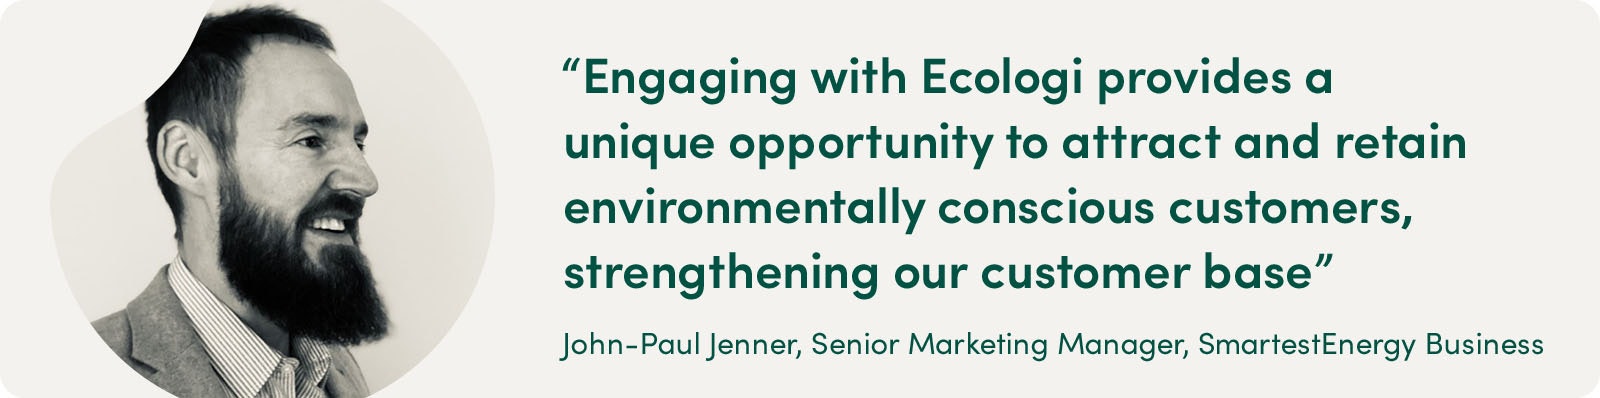 Engaging with Ecologi provides a unique opportunity to attract and retain environmentally conscious customers, strengthening our customer base - John-Paul Jenner, Senior Marketing Manager